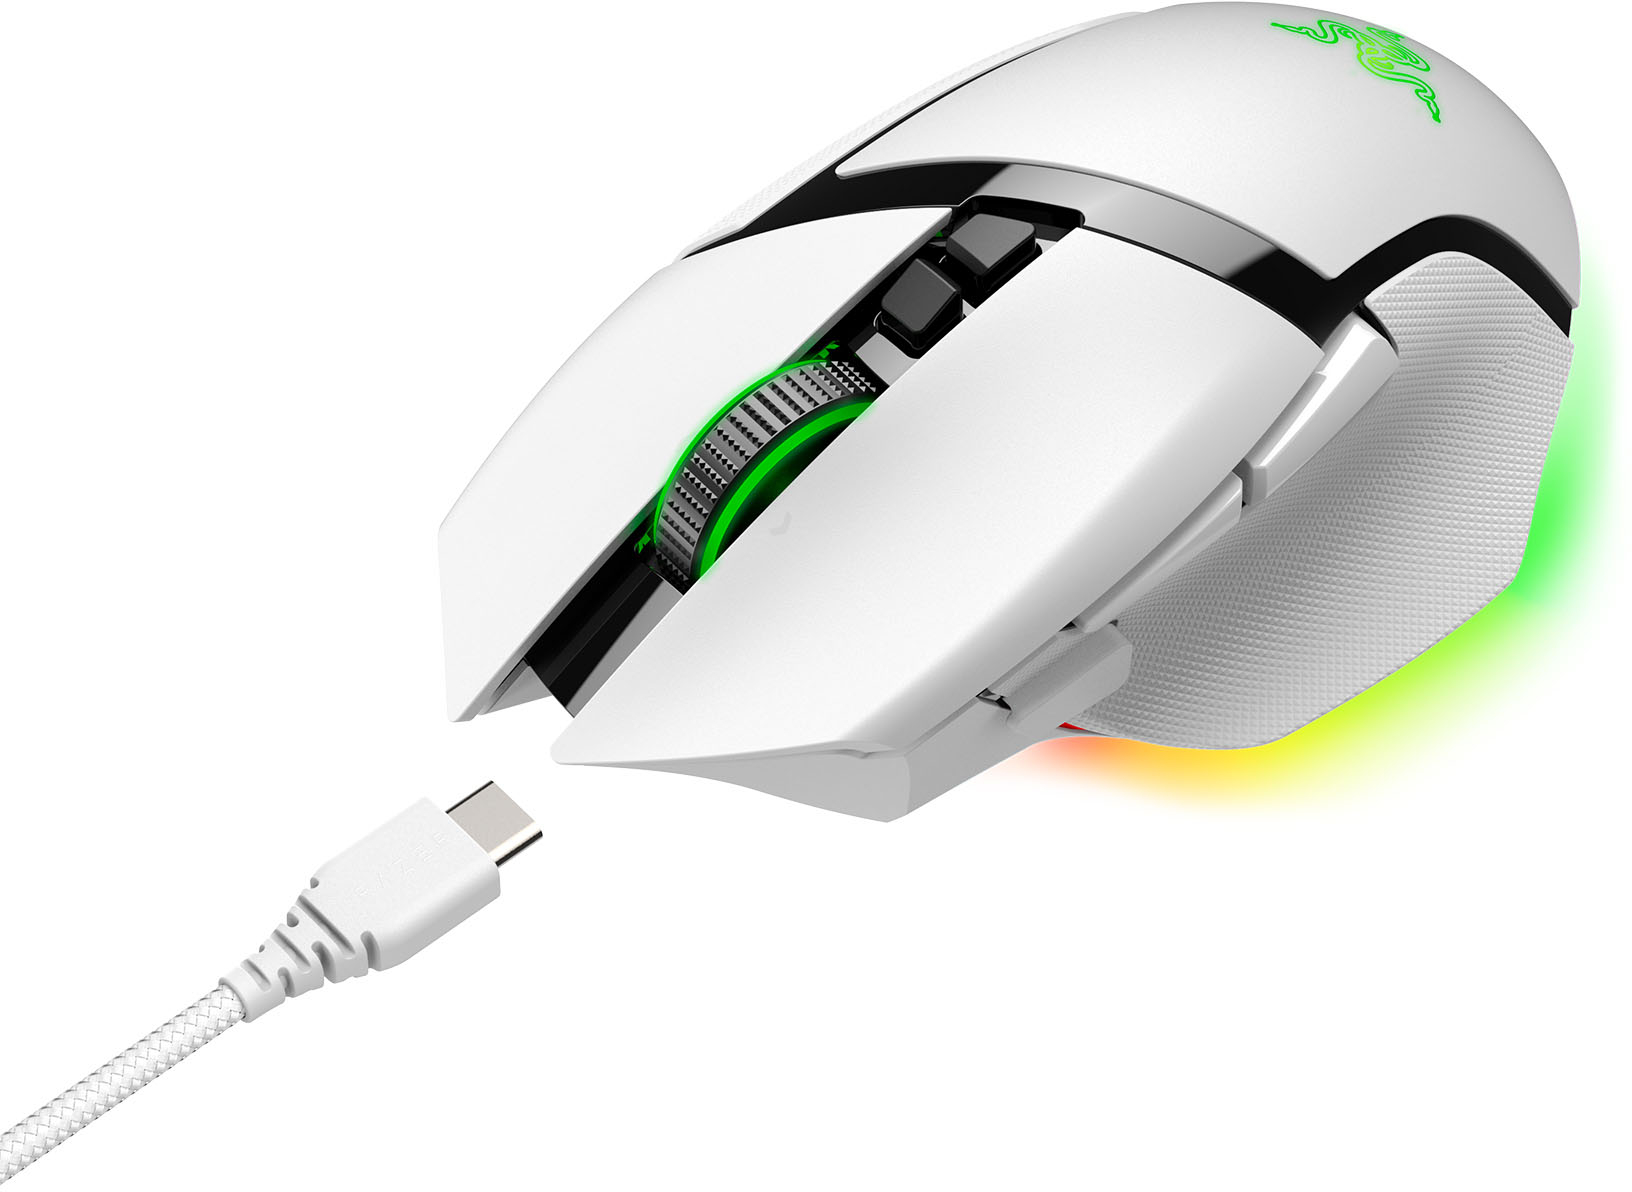 Angle View: CORSAIR - M65 Ultra Wireless Optical Gaming Mouse with Slipstream Technology - Black